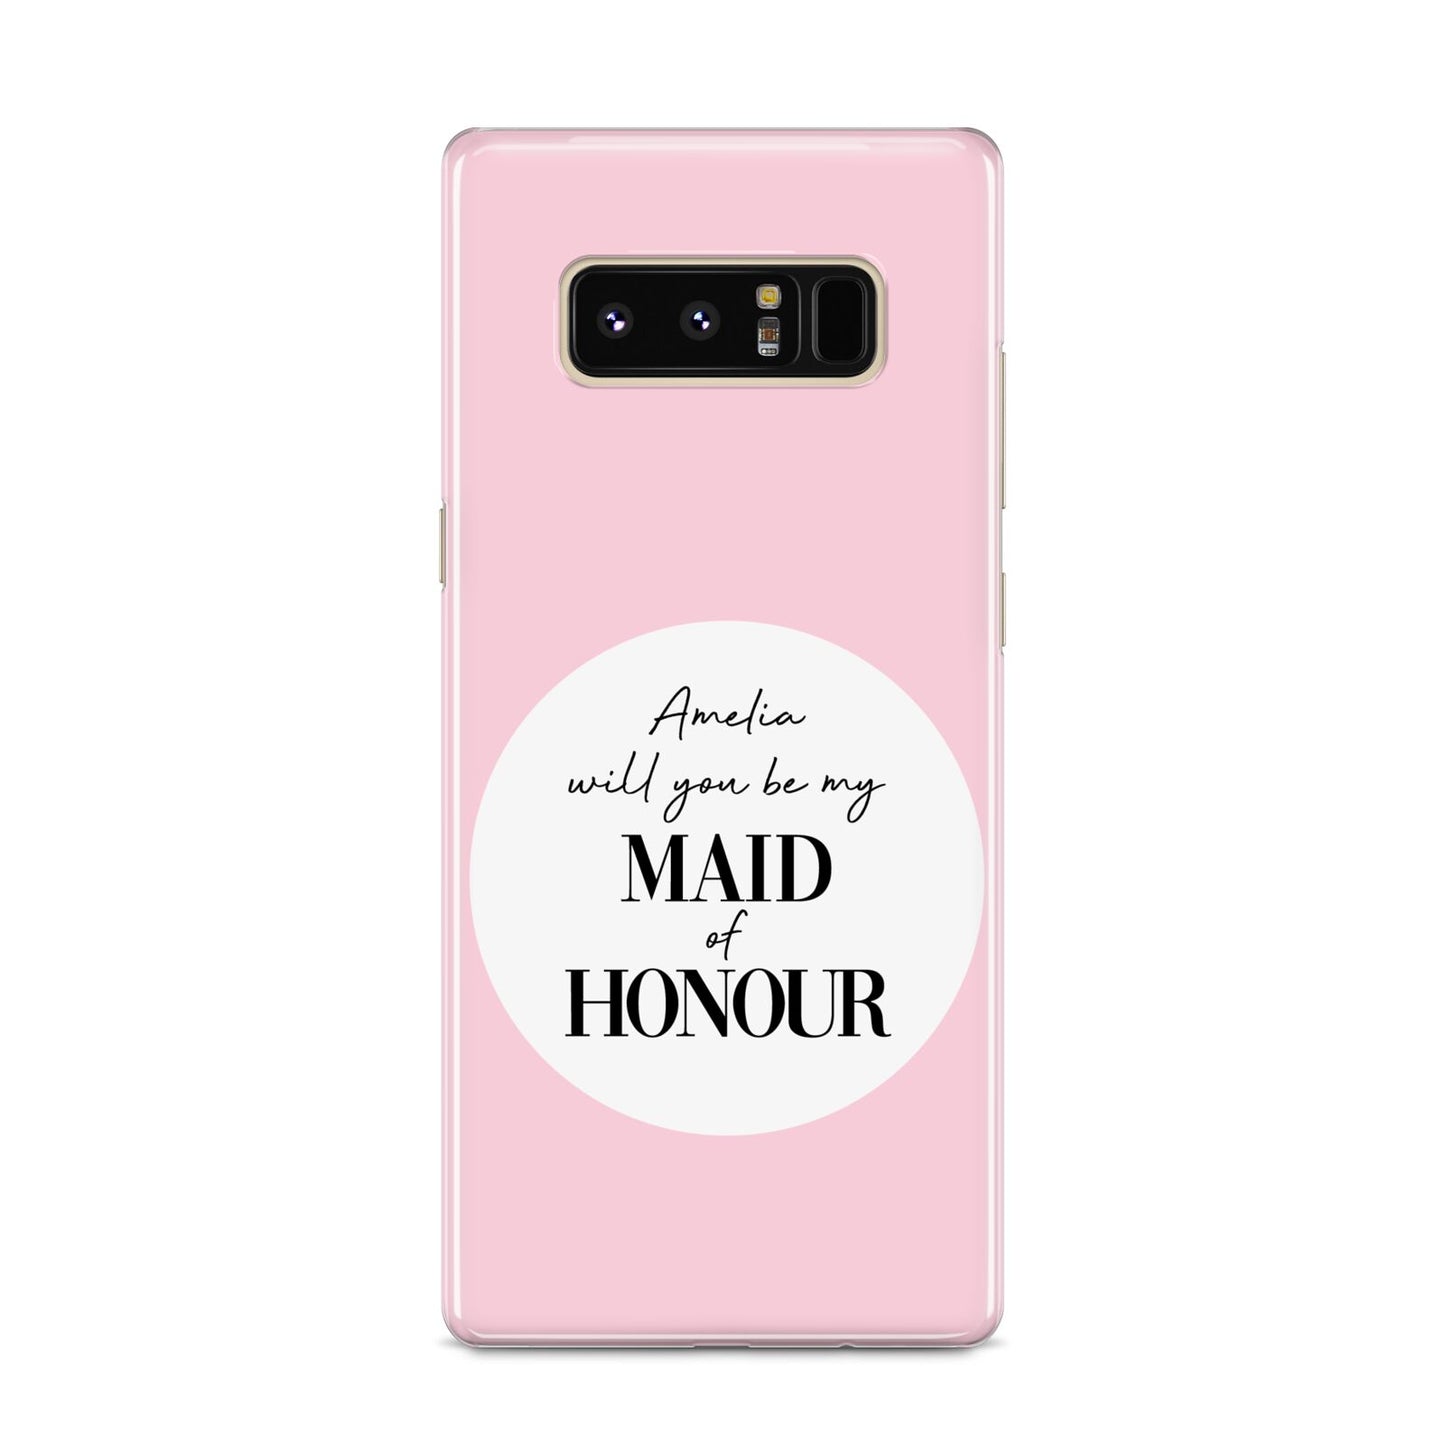 Will You Be My Maid Of Honour Samsung Galaxy S8 Case